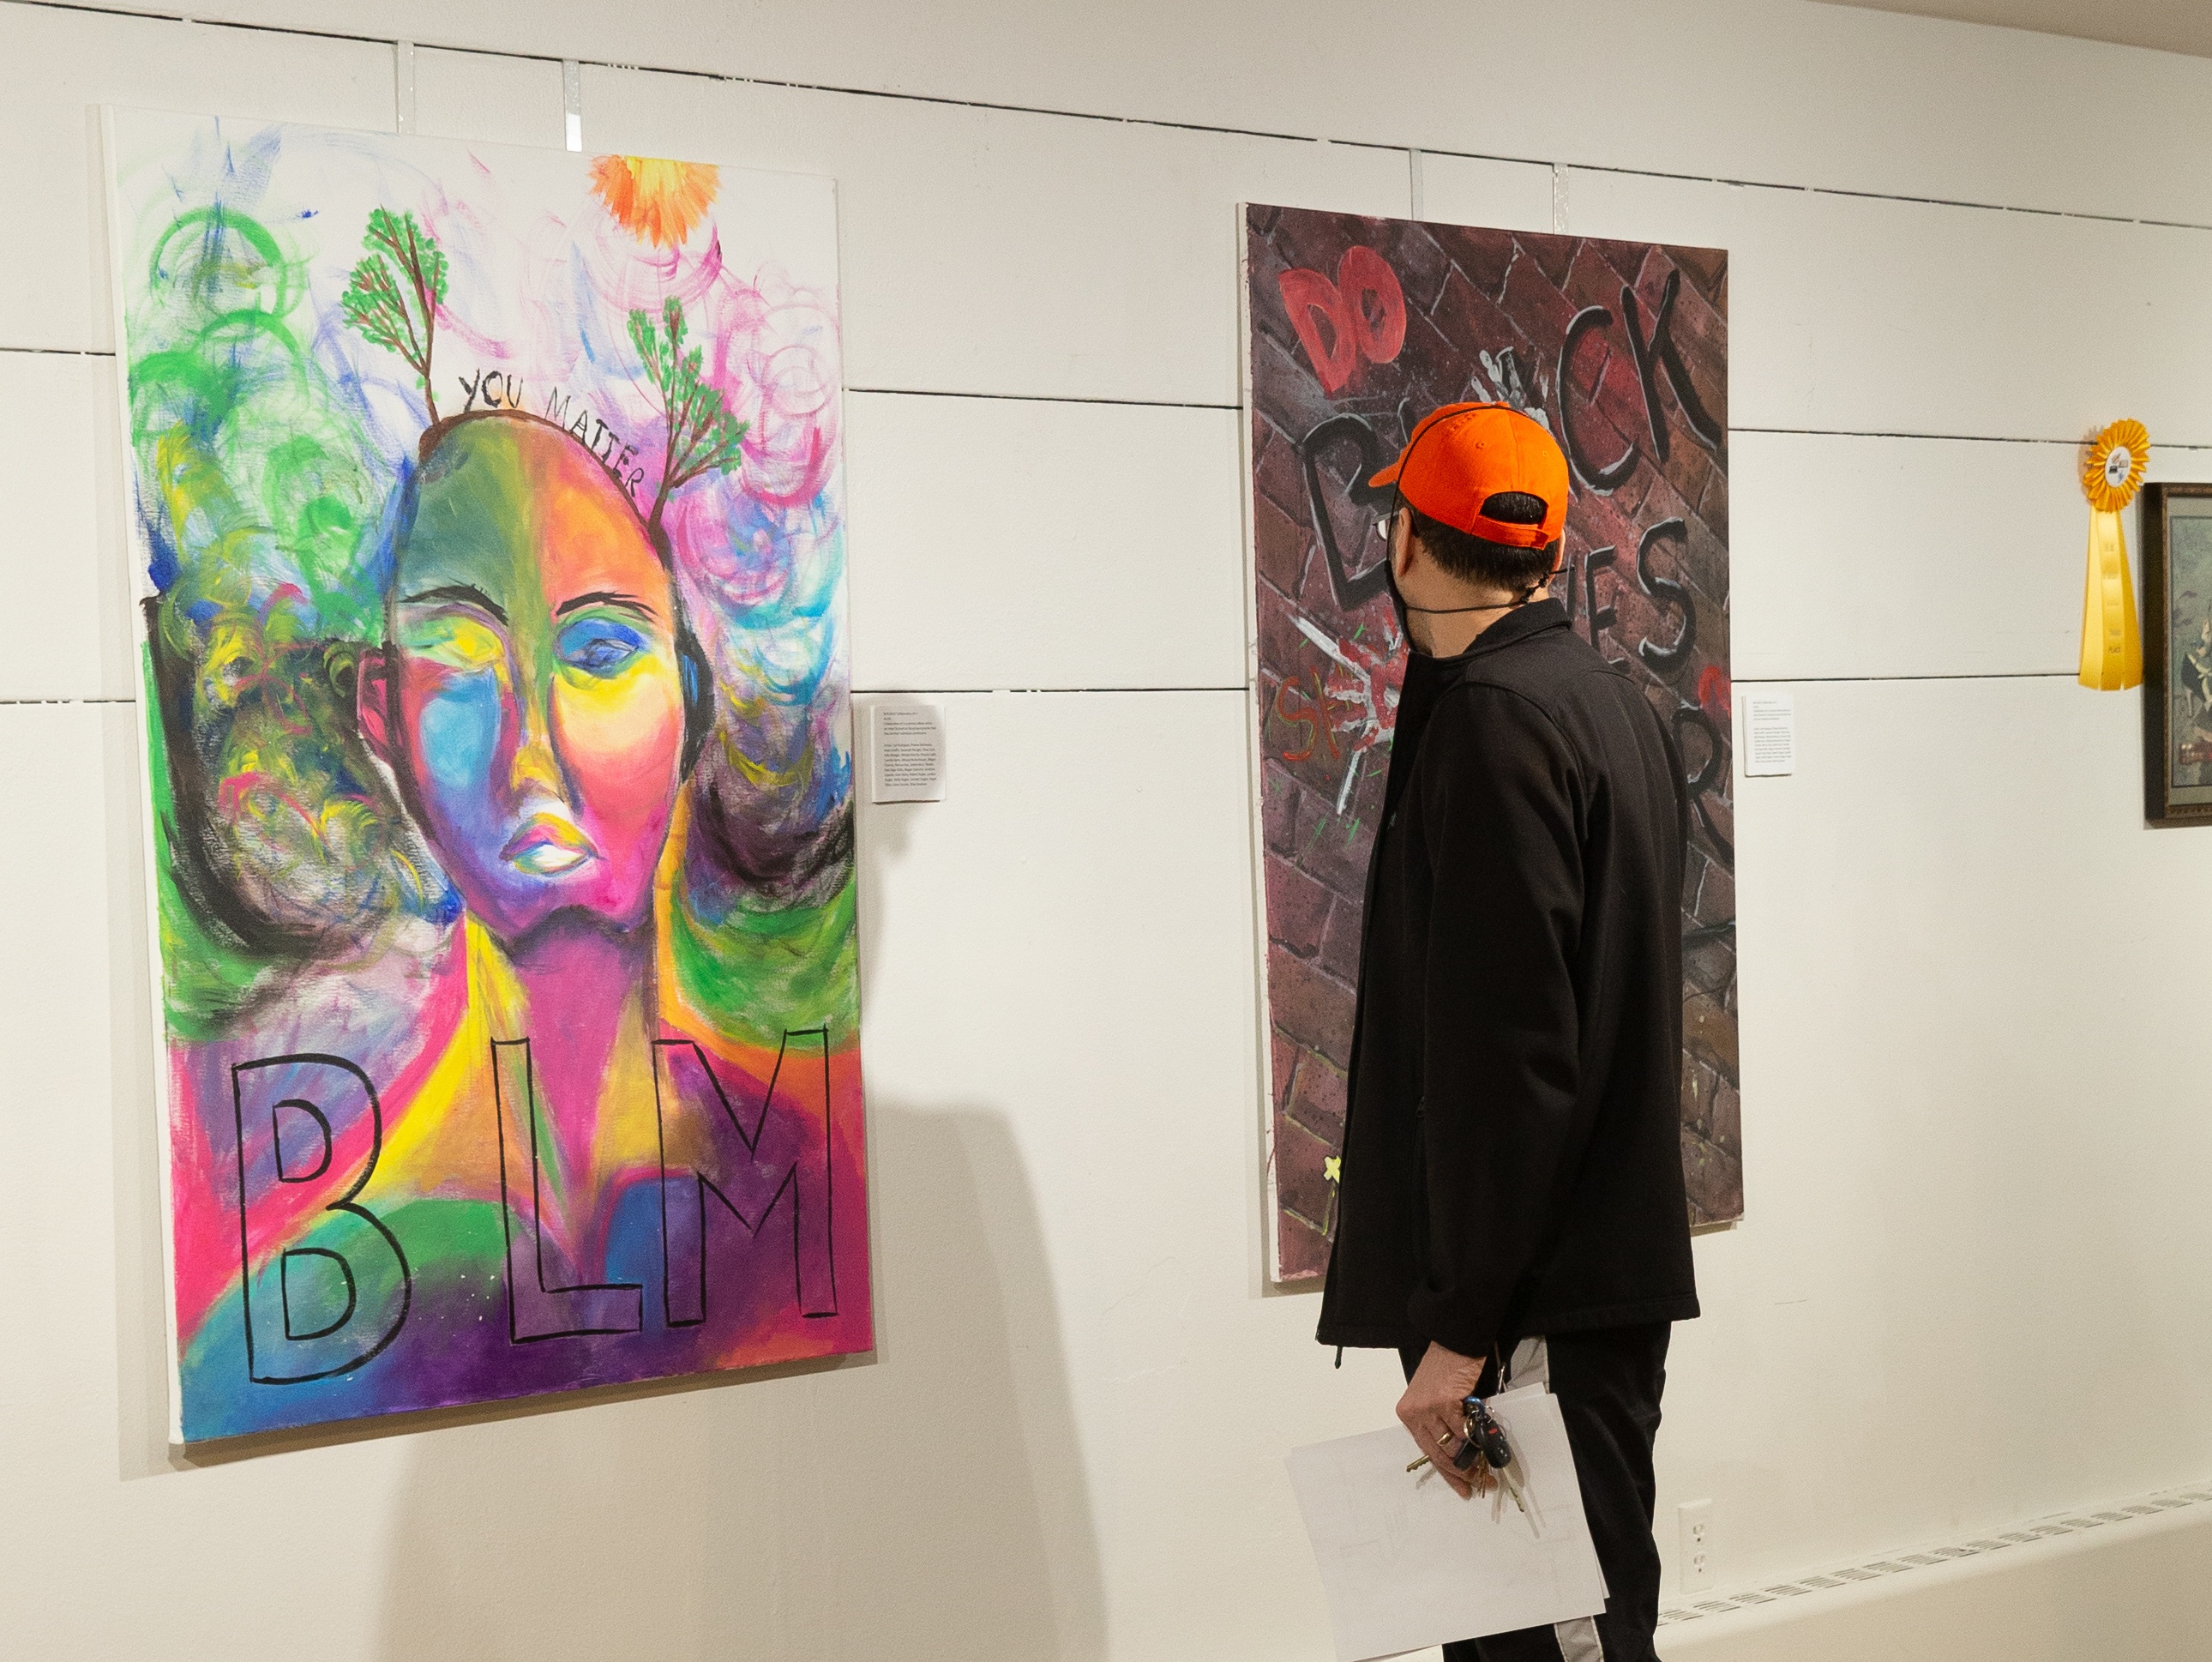 A person dressed in black with a orange baseball cap looking at an Art of Diversity painting